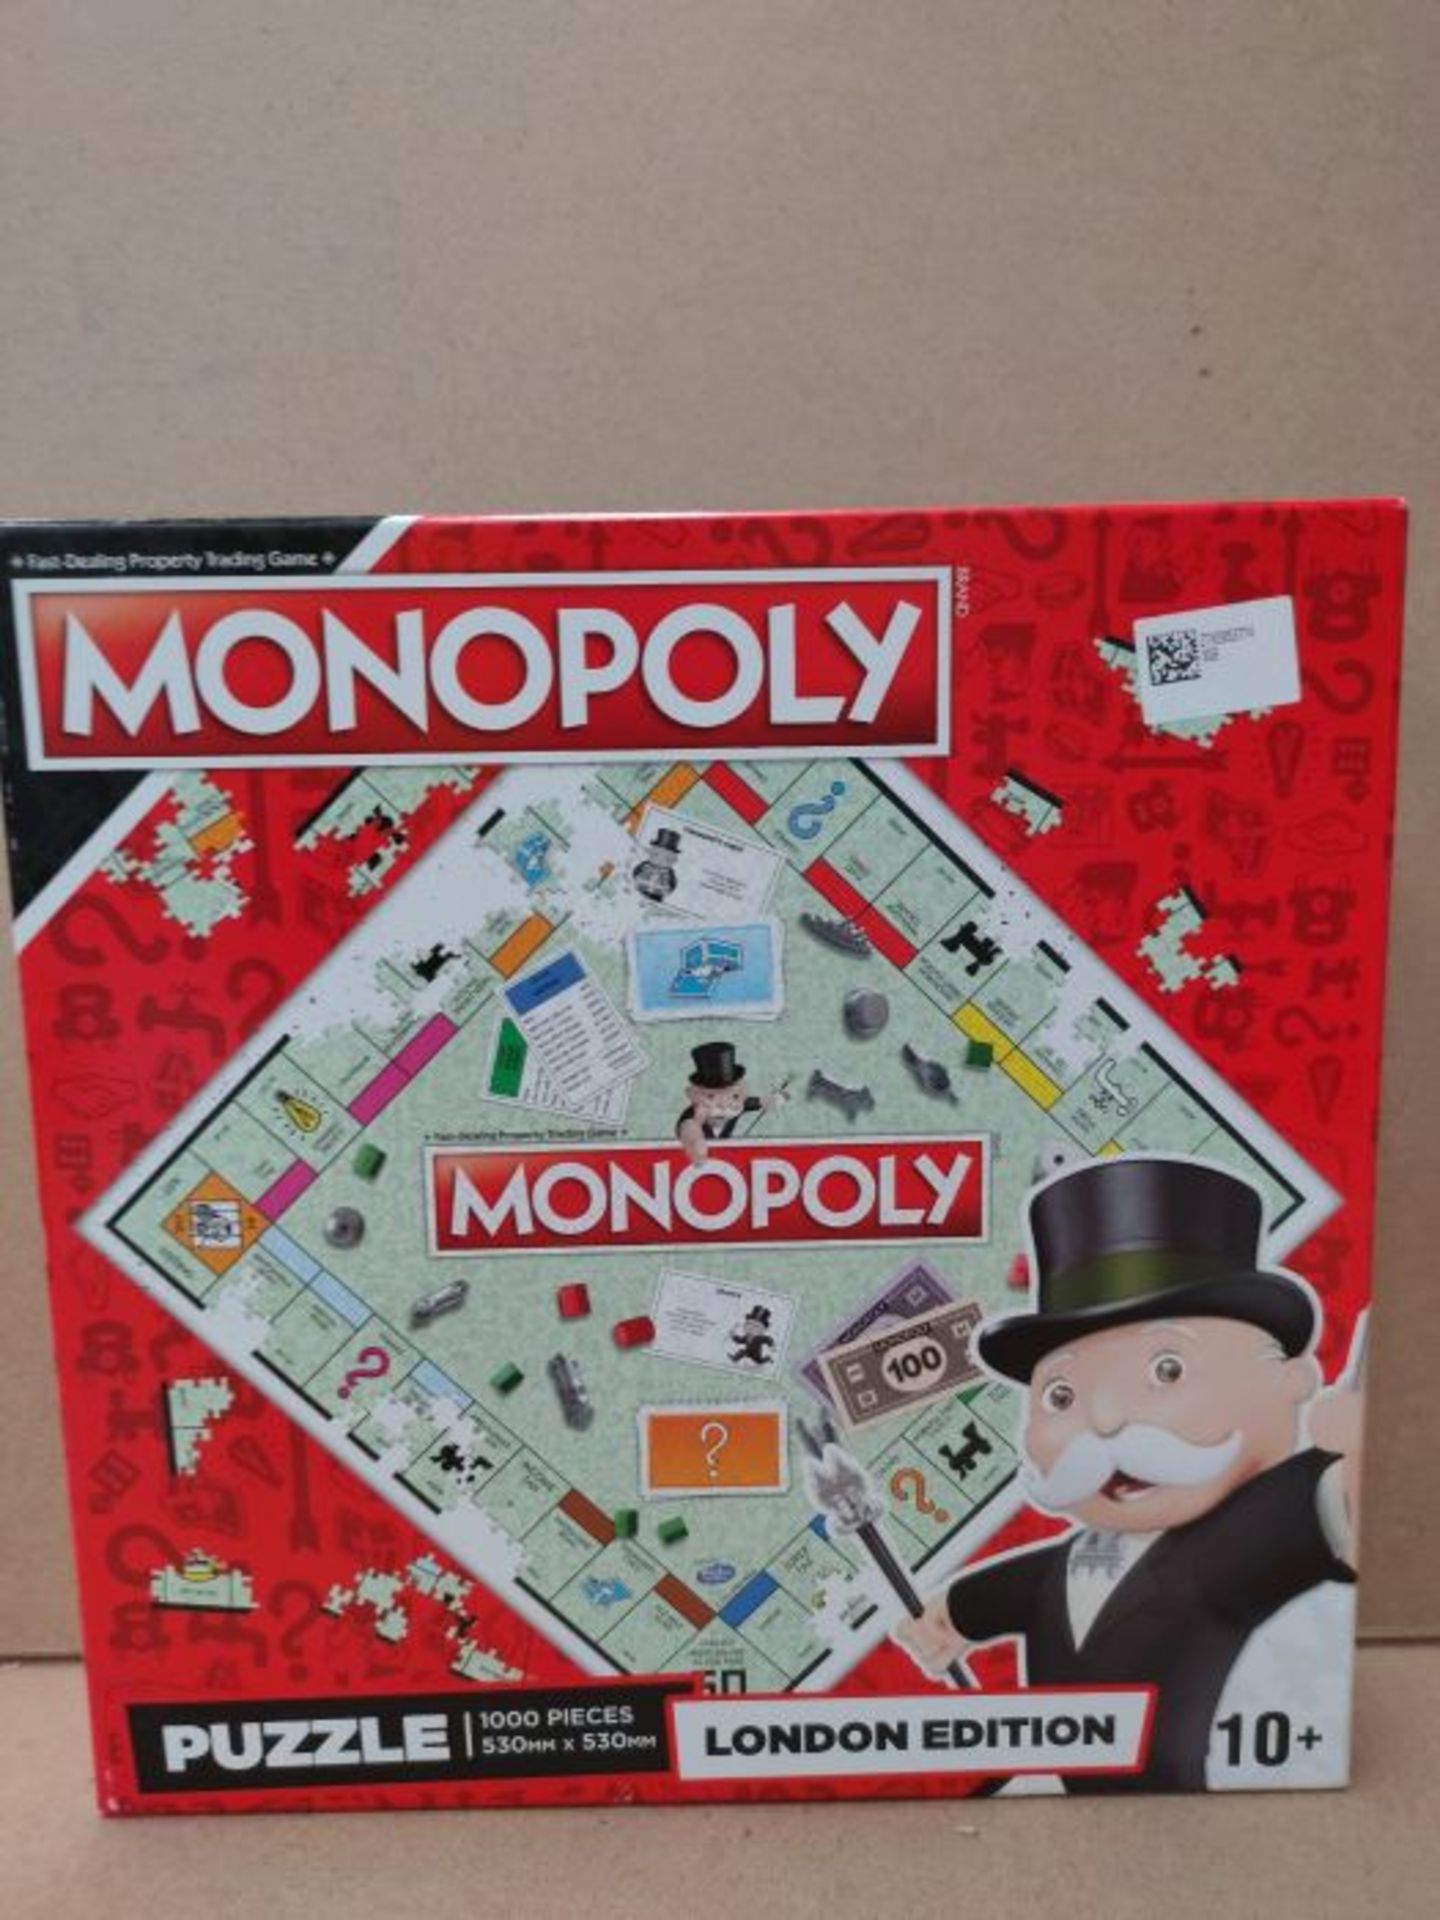 London Monopoly 1000 Piece Jigsaw Puzzle Game - Image 2 of 3